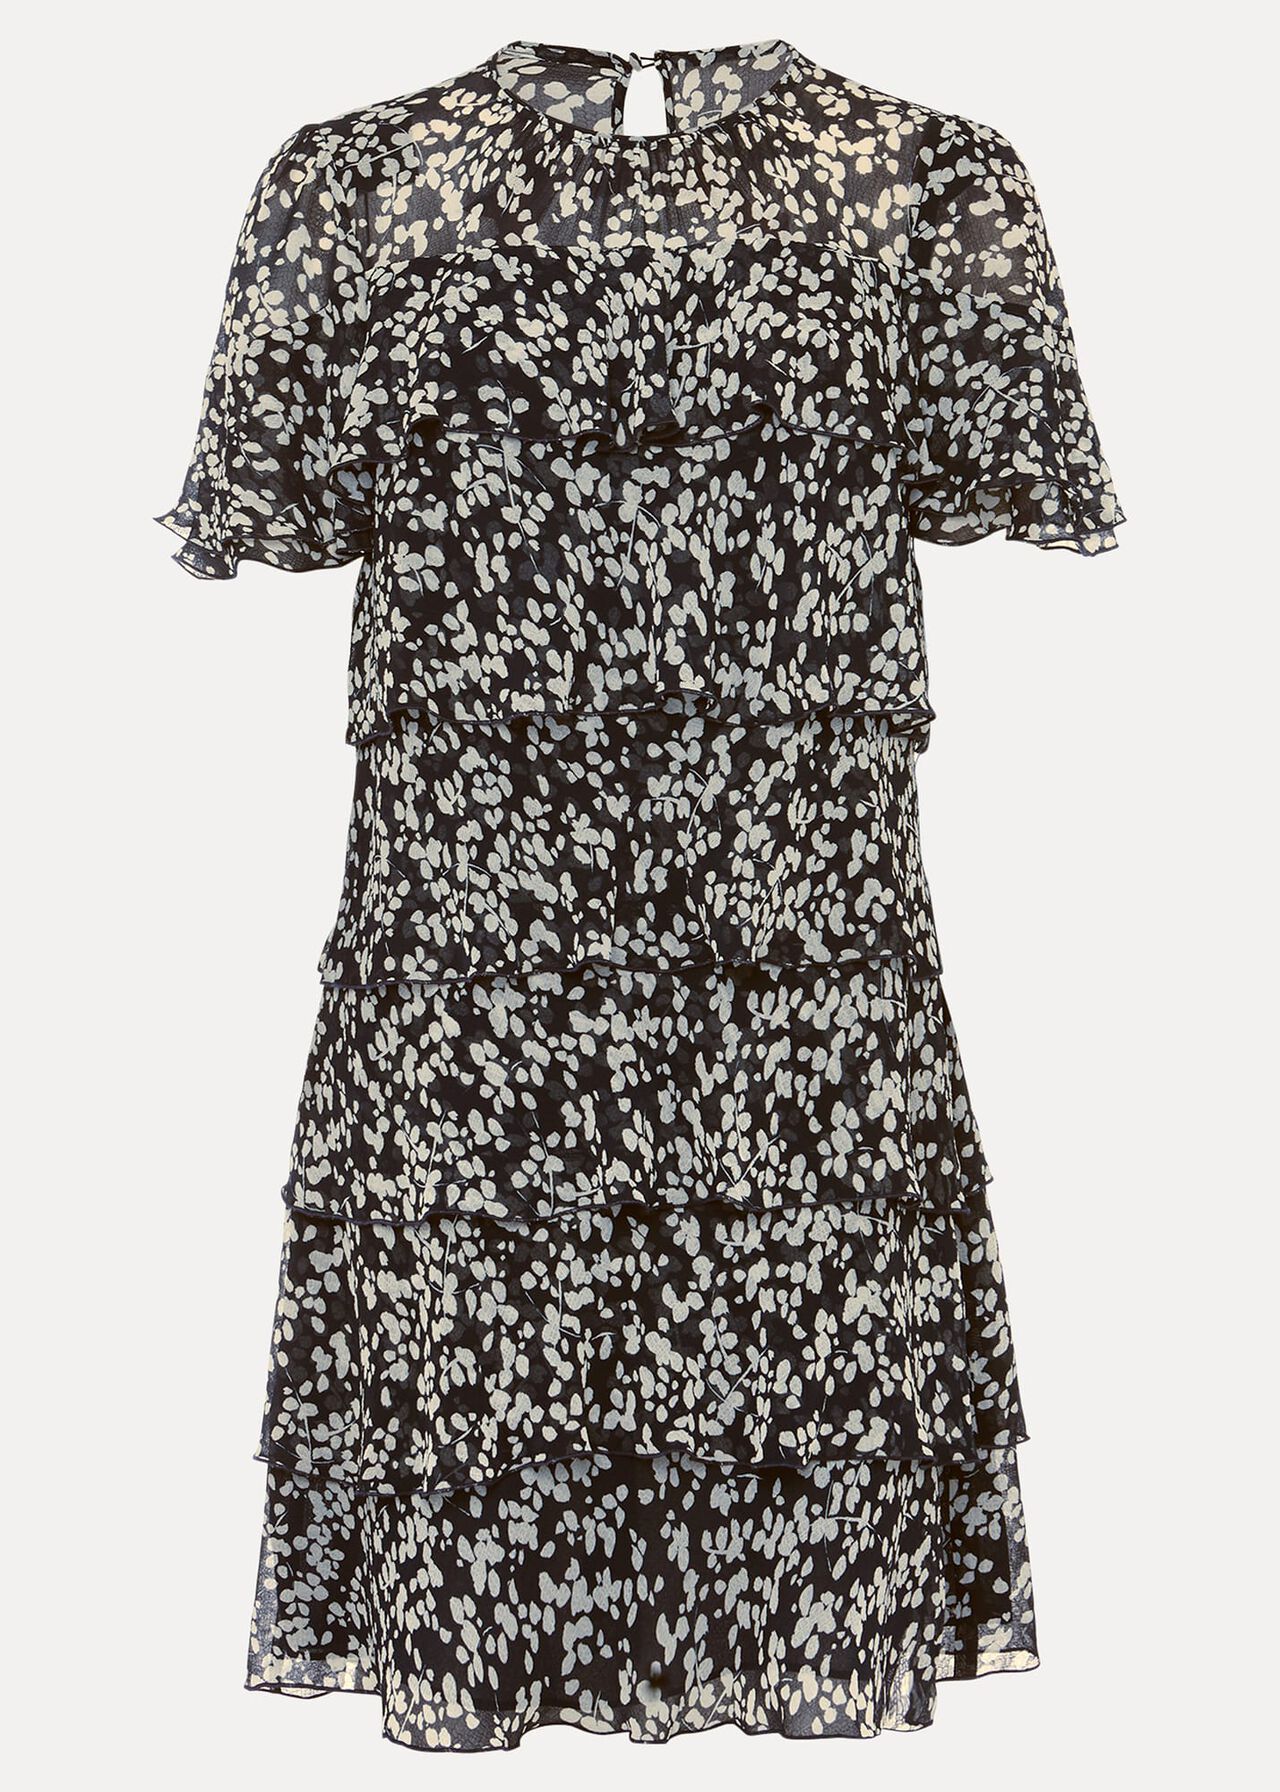 Maeve Floral Tiered Shift Dress